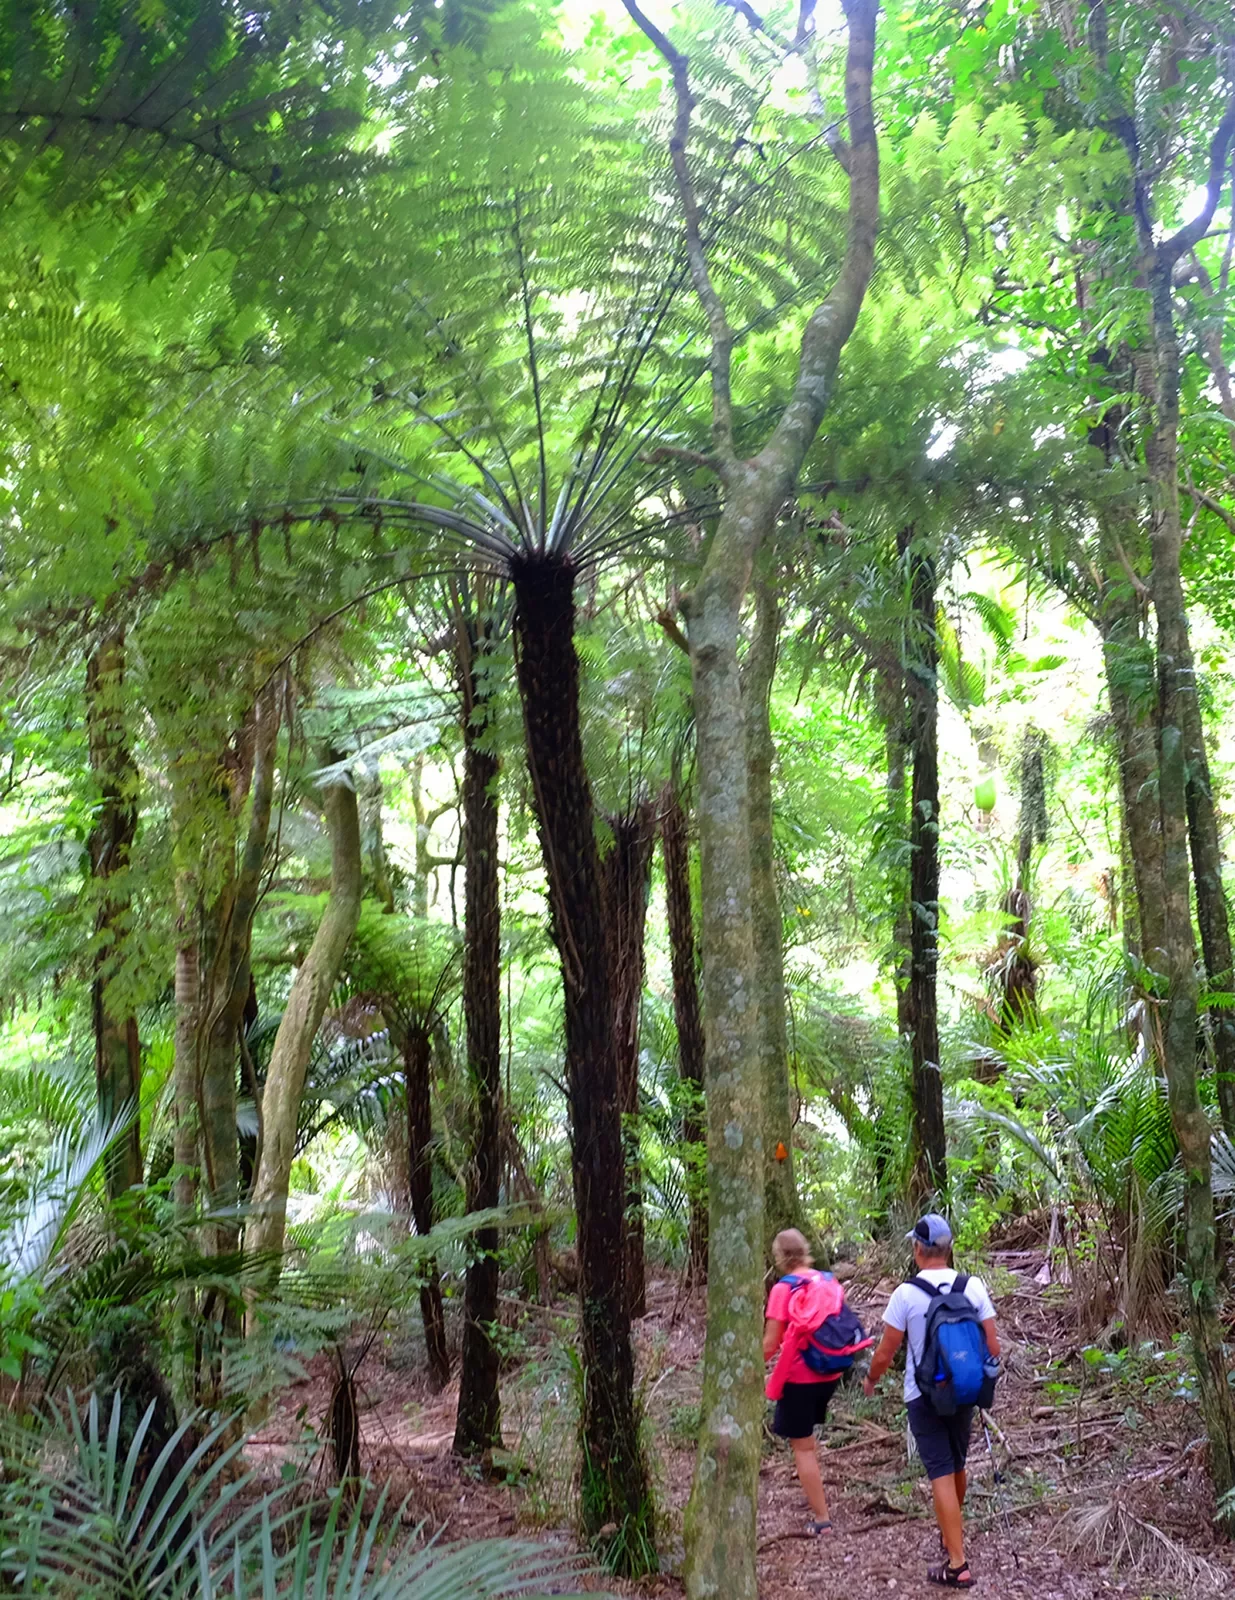 Hiking through a forest in New Zealand